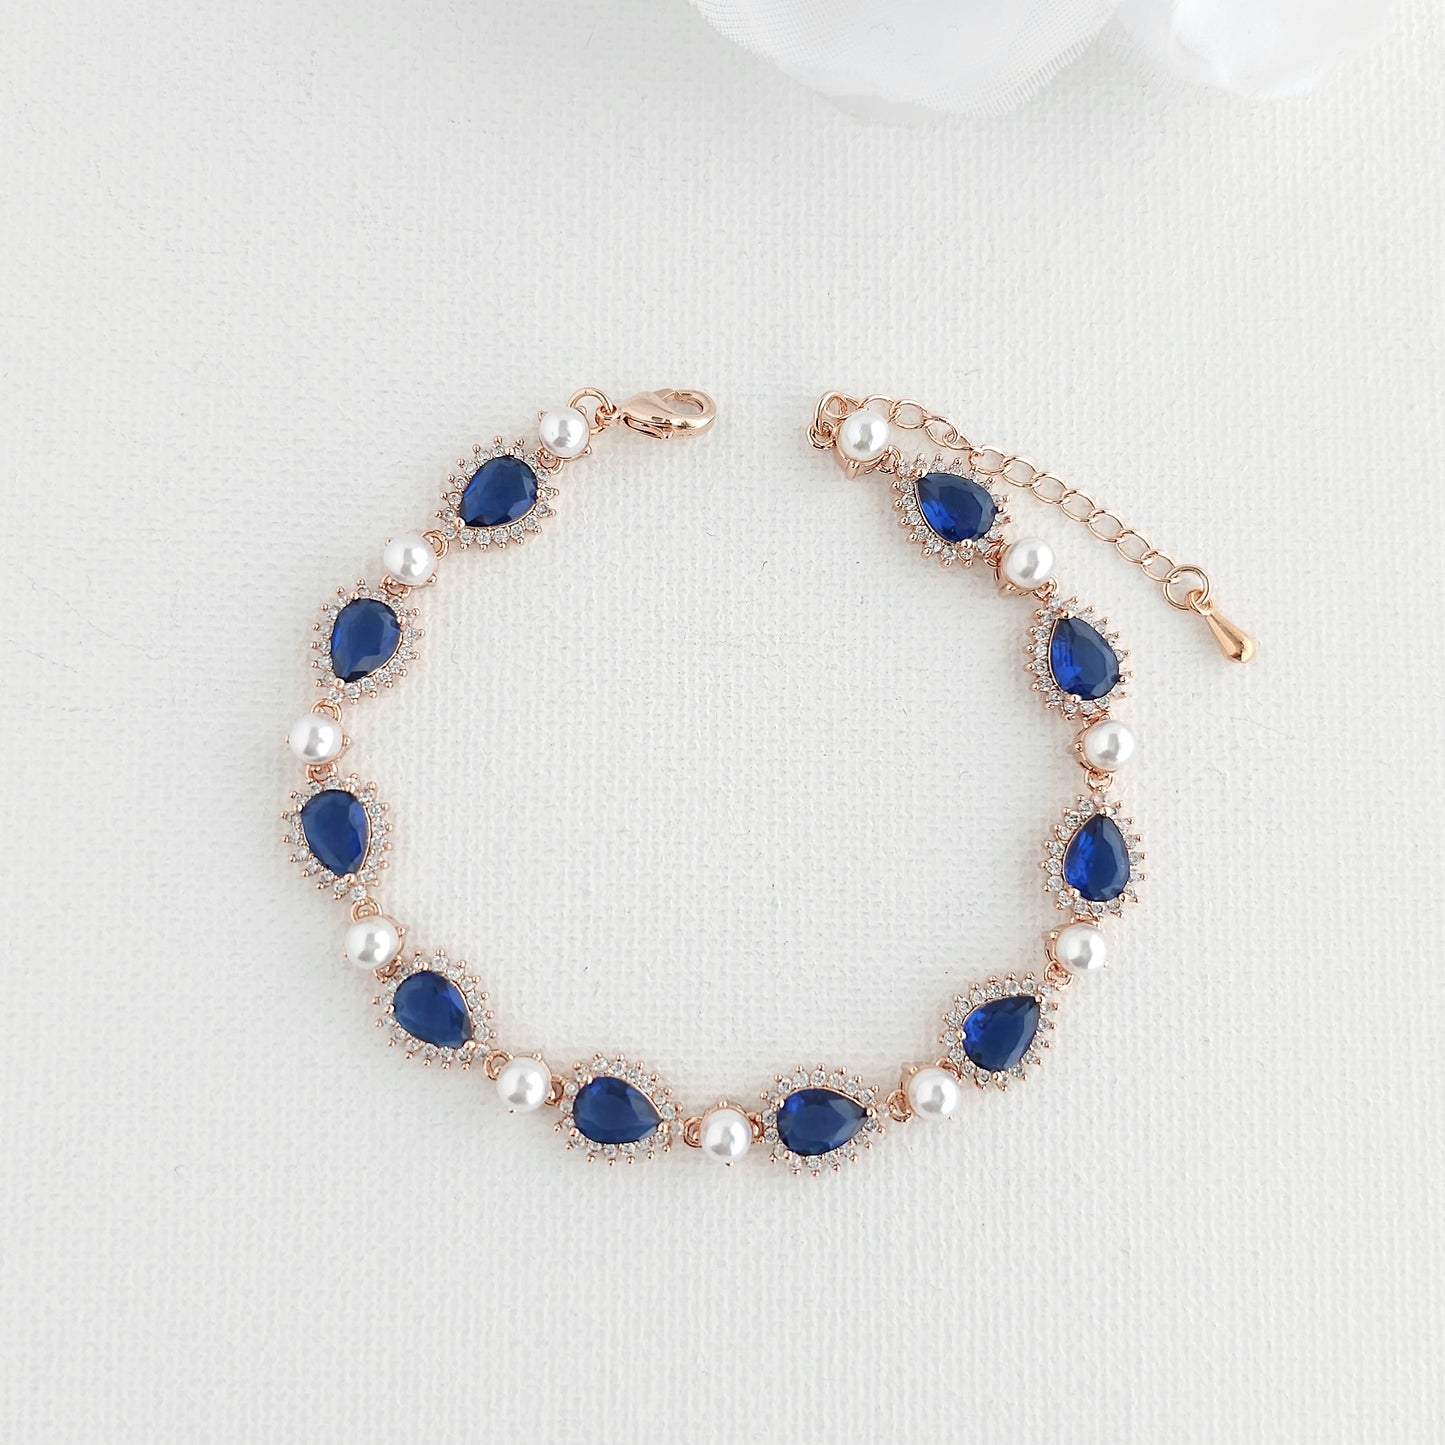 Blue Bracelet with Pearls for Weddings & Events- Aoi